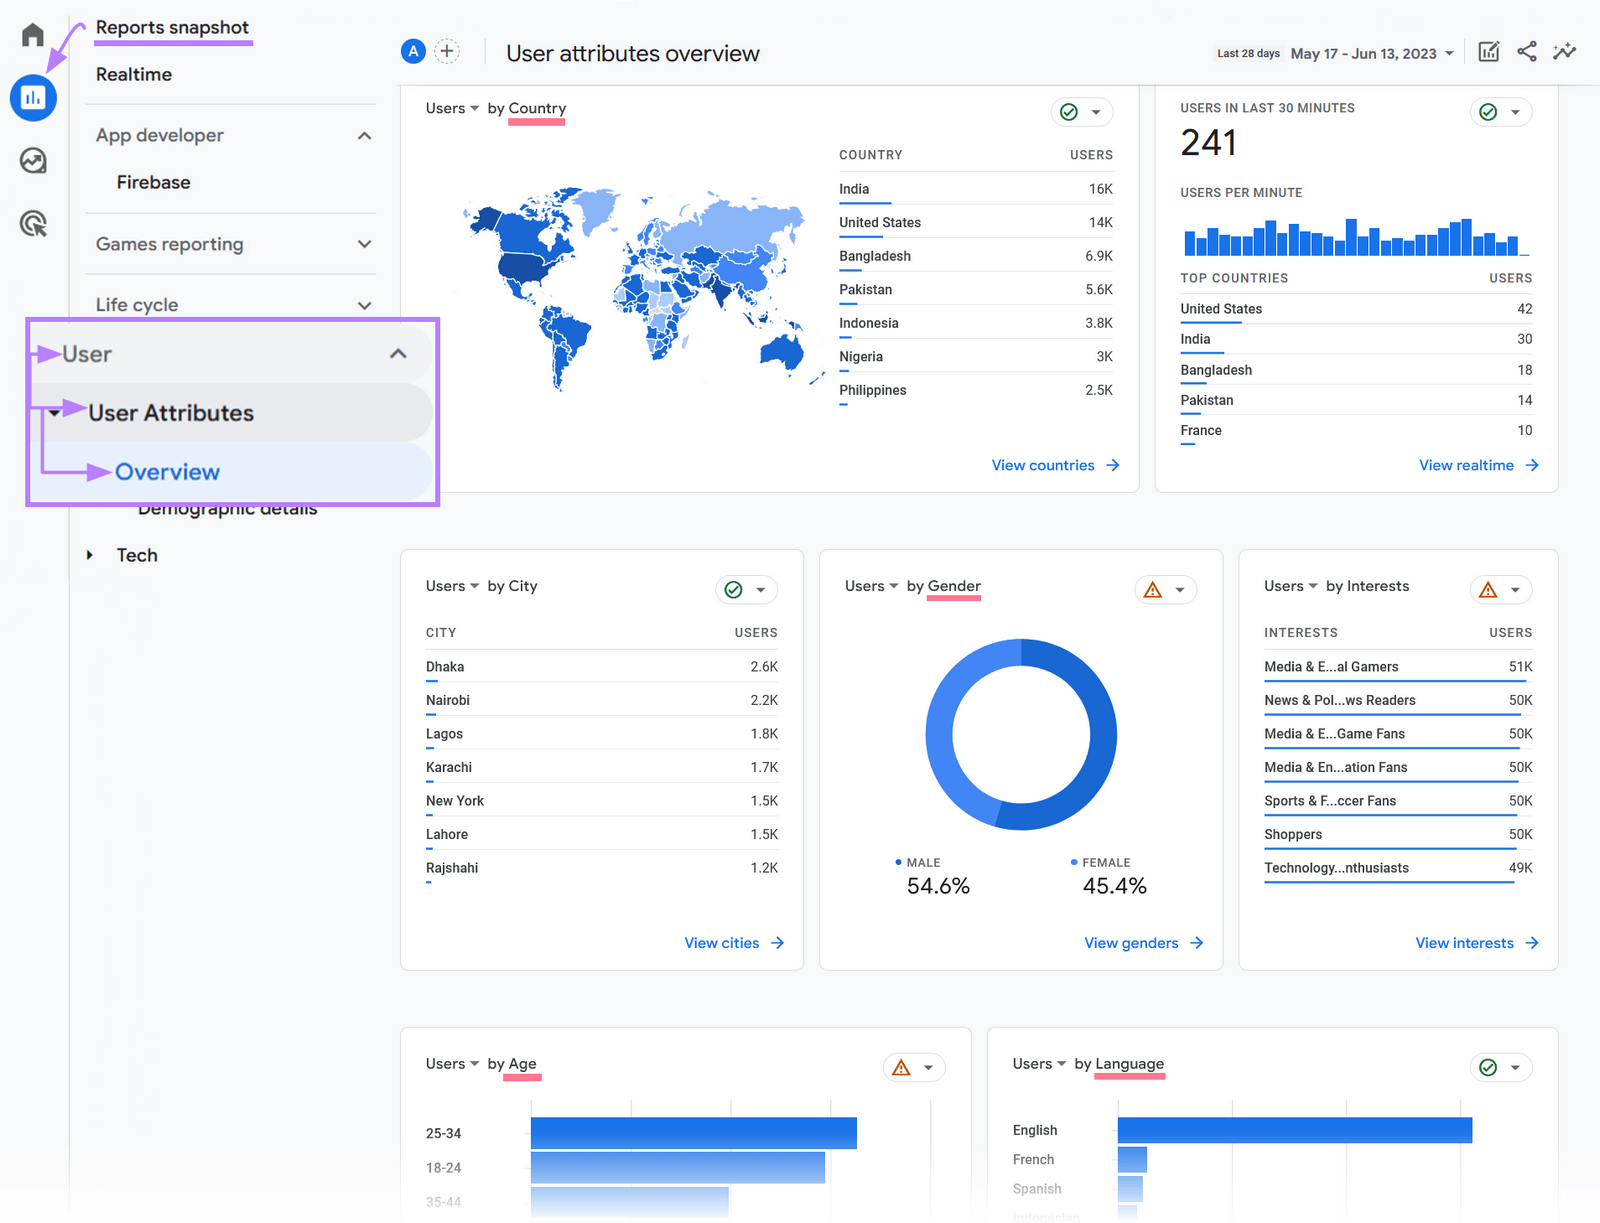 Google Analytics dashboard showing user attributes or audience data.